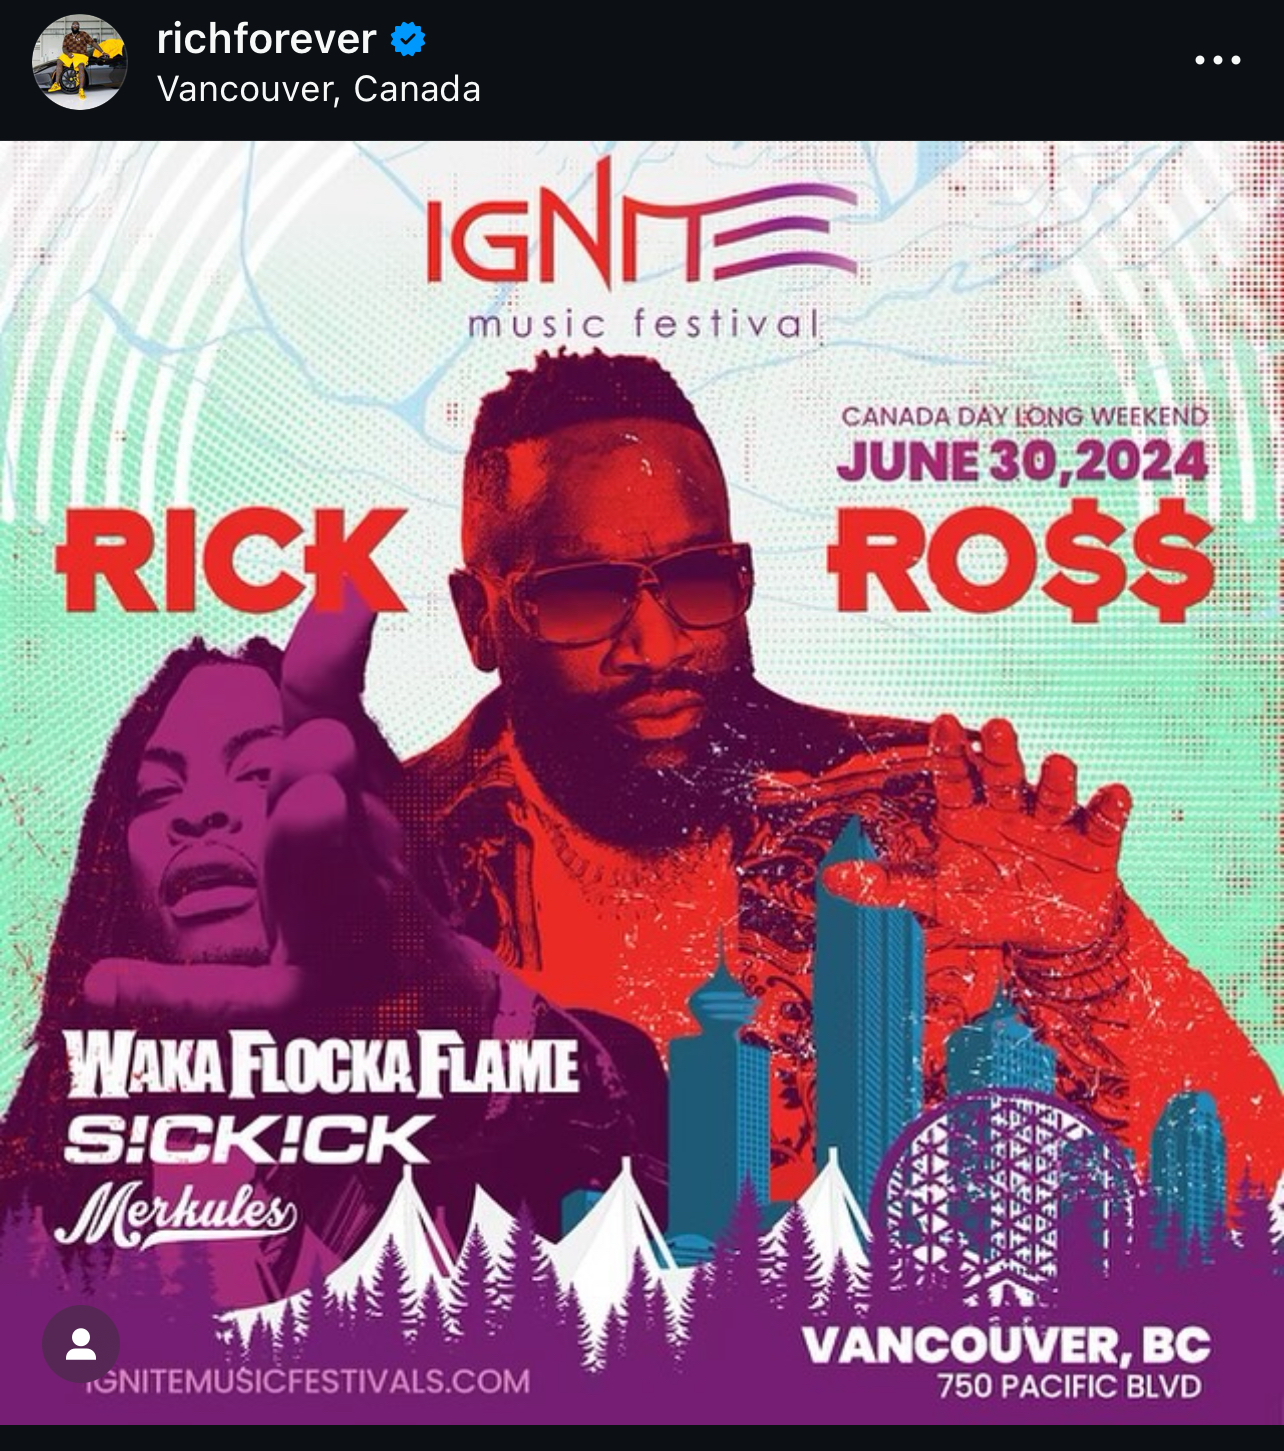 Rick Ross and Waka Flocka Flame will headline the Ignite Music Festival on June 30, 2024, in Vancouver, BC. Special guest: Merkules